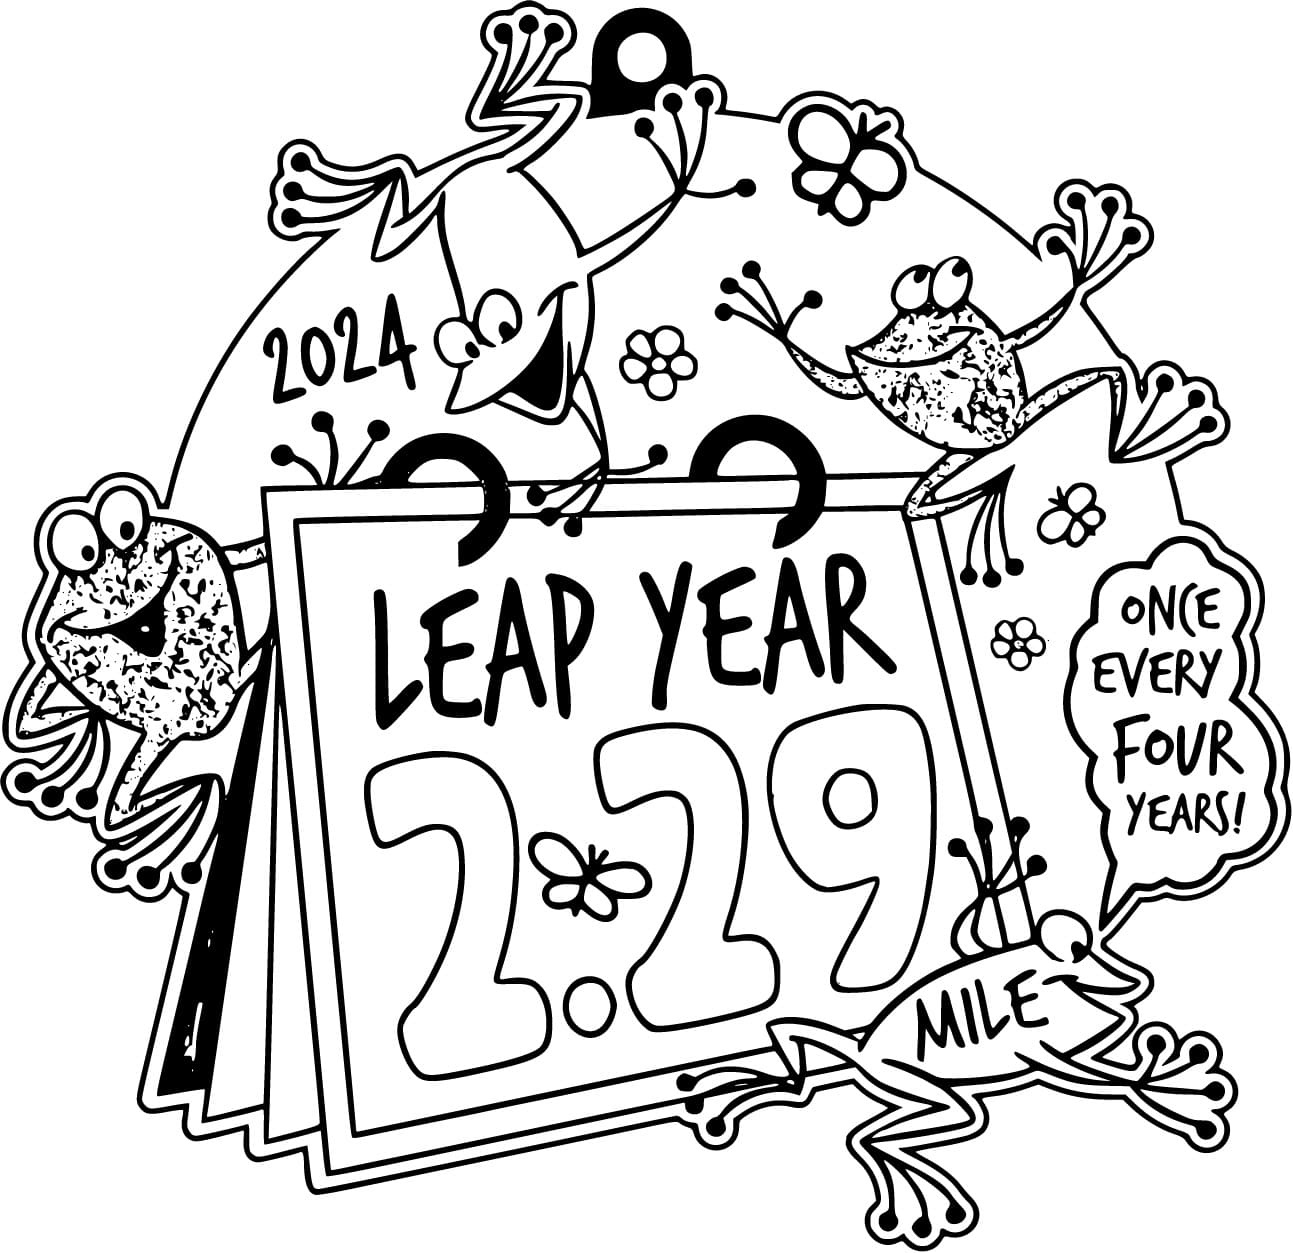 Leap Year coloring page - Download, Print or Color Online for Free